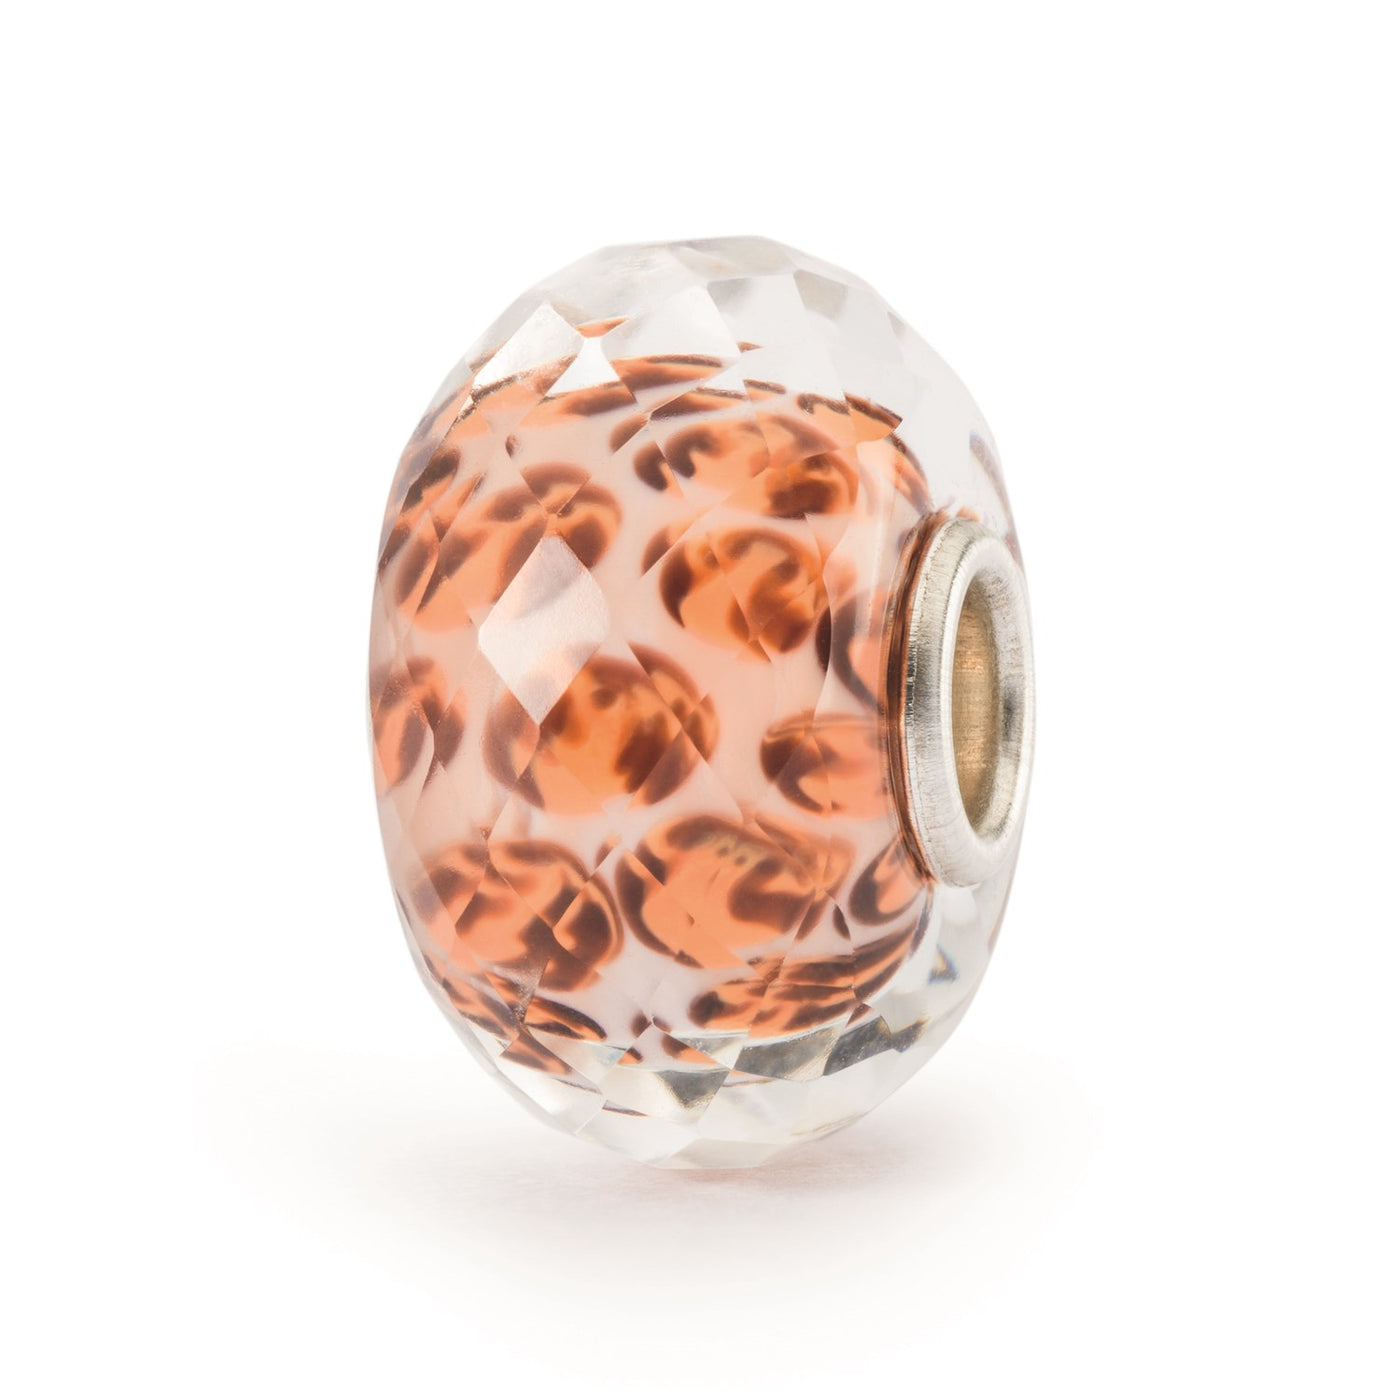 A beautiful faceted glass bead with a leopard spot pattern resembling that of a leopard. The spots are a mix of orange, and light brown tones on a beige background.